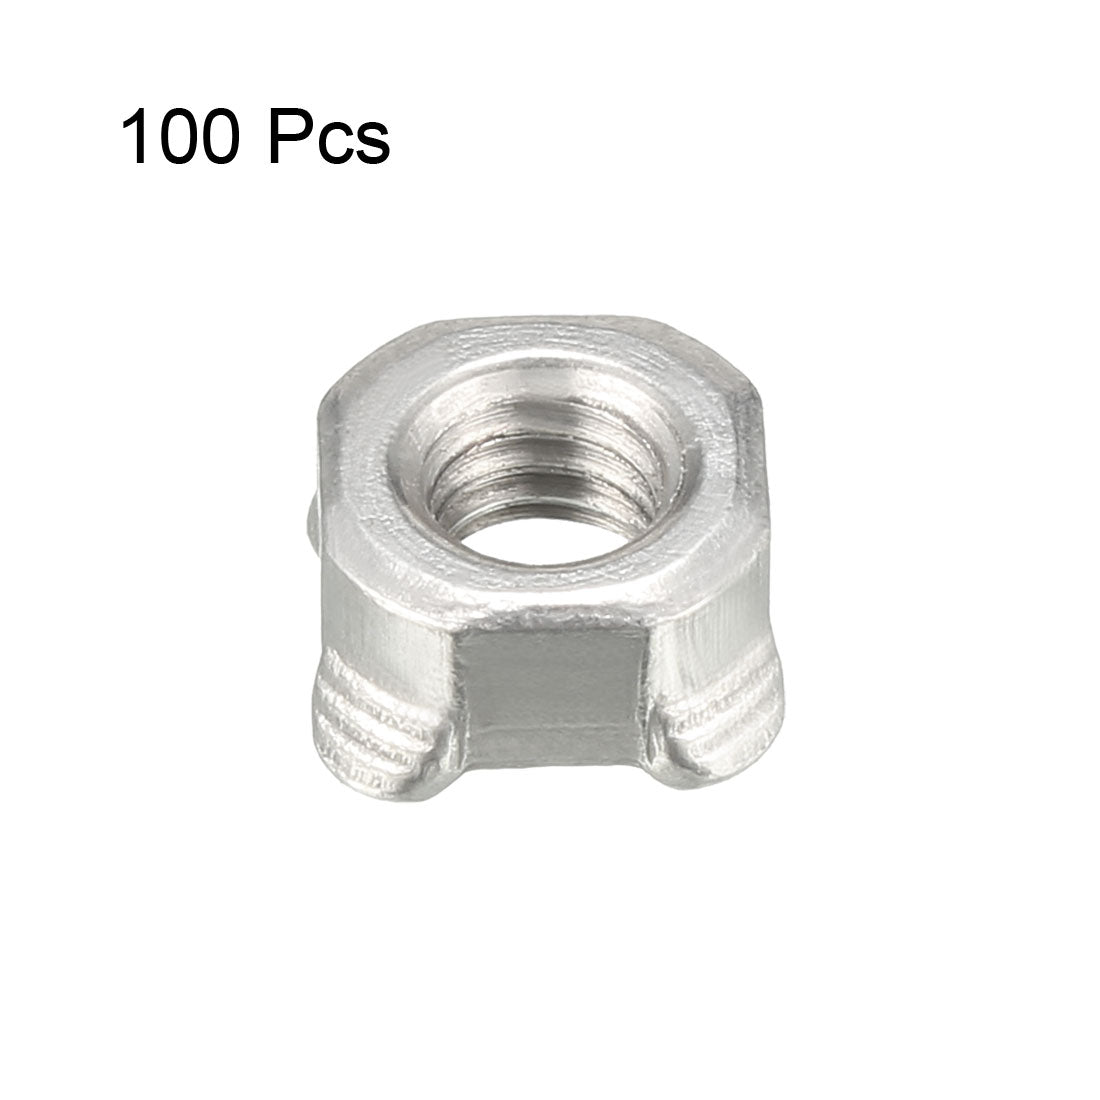 Uxcell Uxcell Weld Nuts,M4 Square UNC Carbon Steel Machine Screw Silver 100Pcs